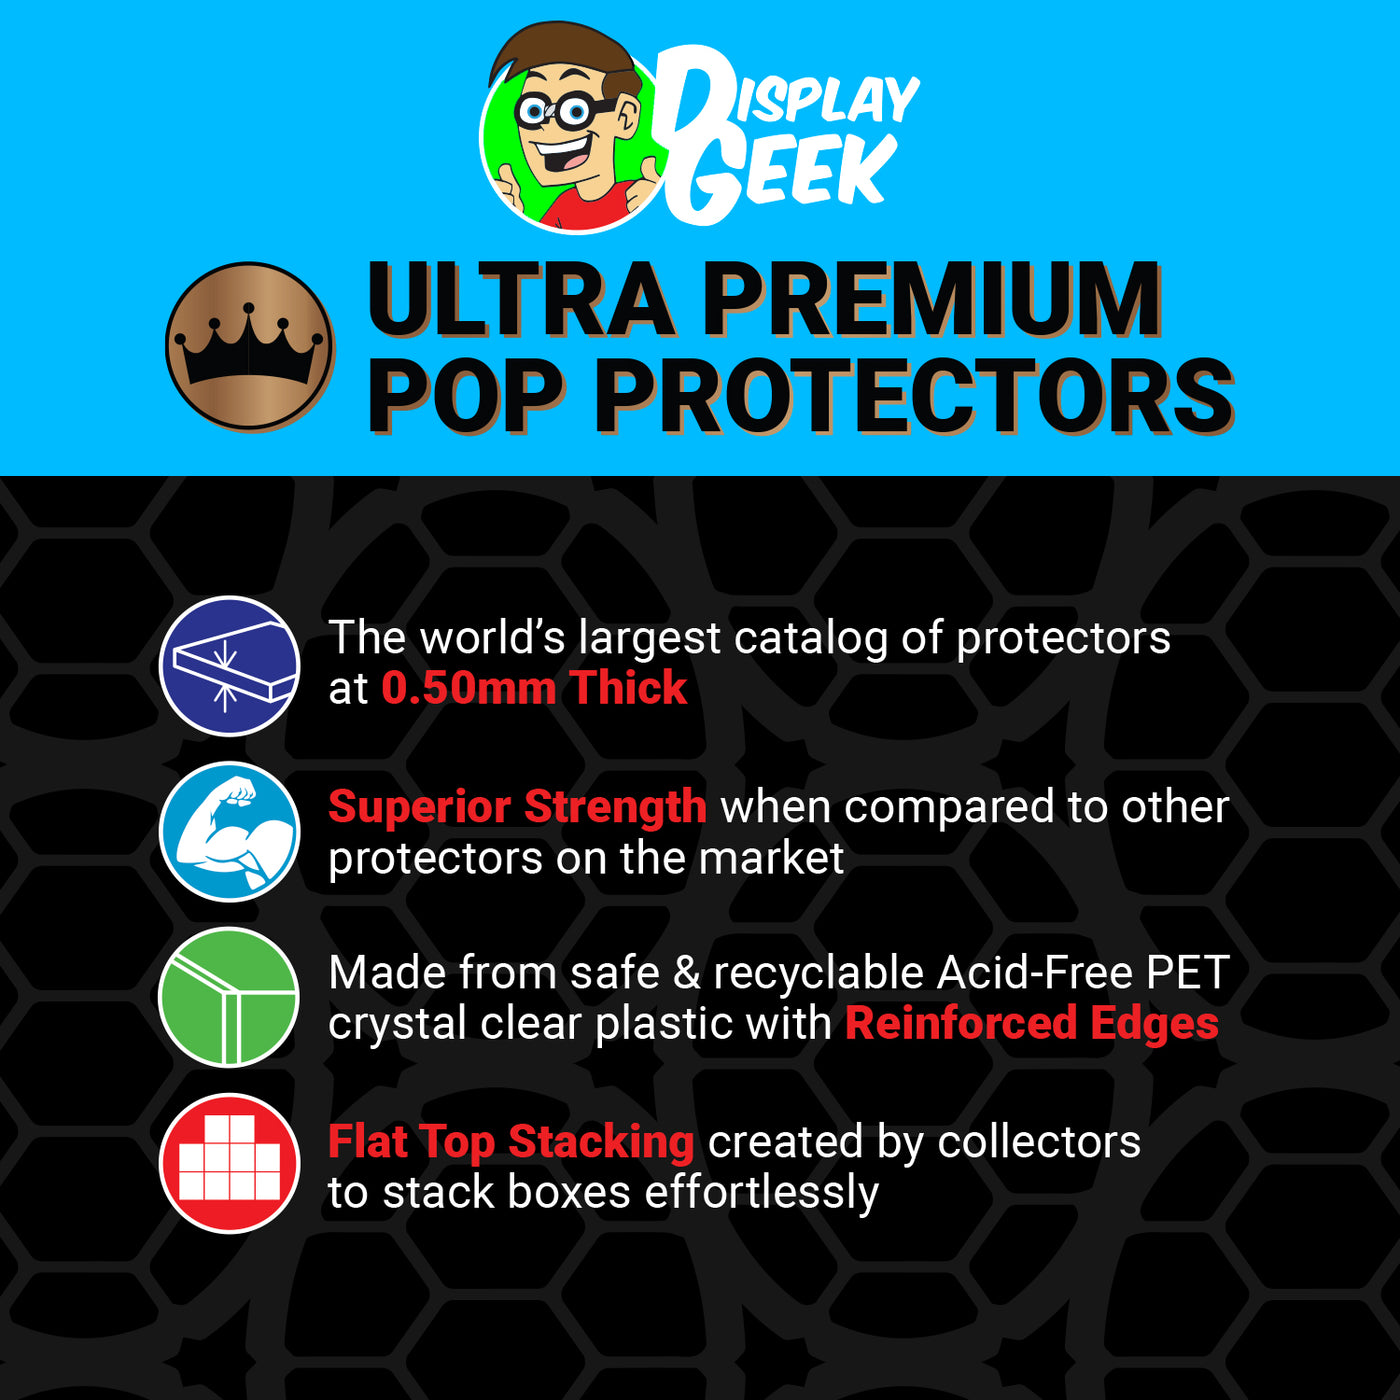 Pop Protector for Shark Biting Quint SDCC #760 Funko Pop Movie Moments on The Protector Guide App by Display Geek